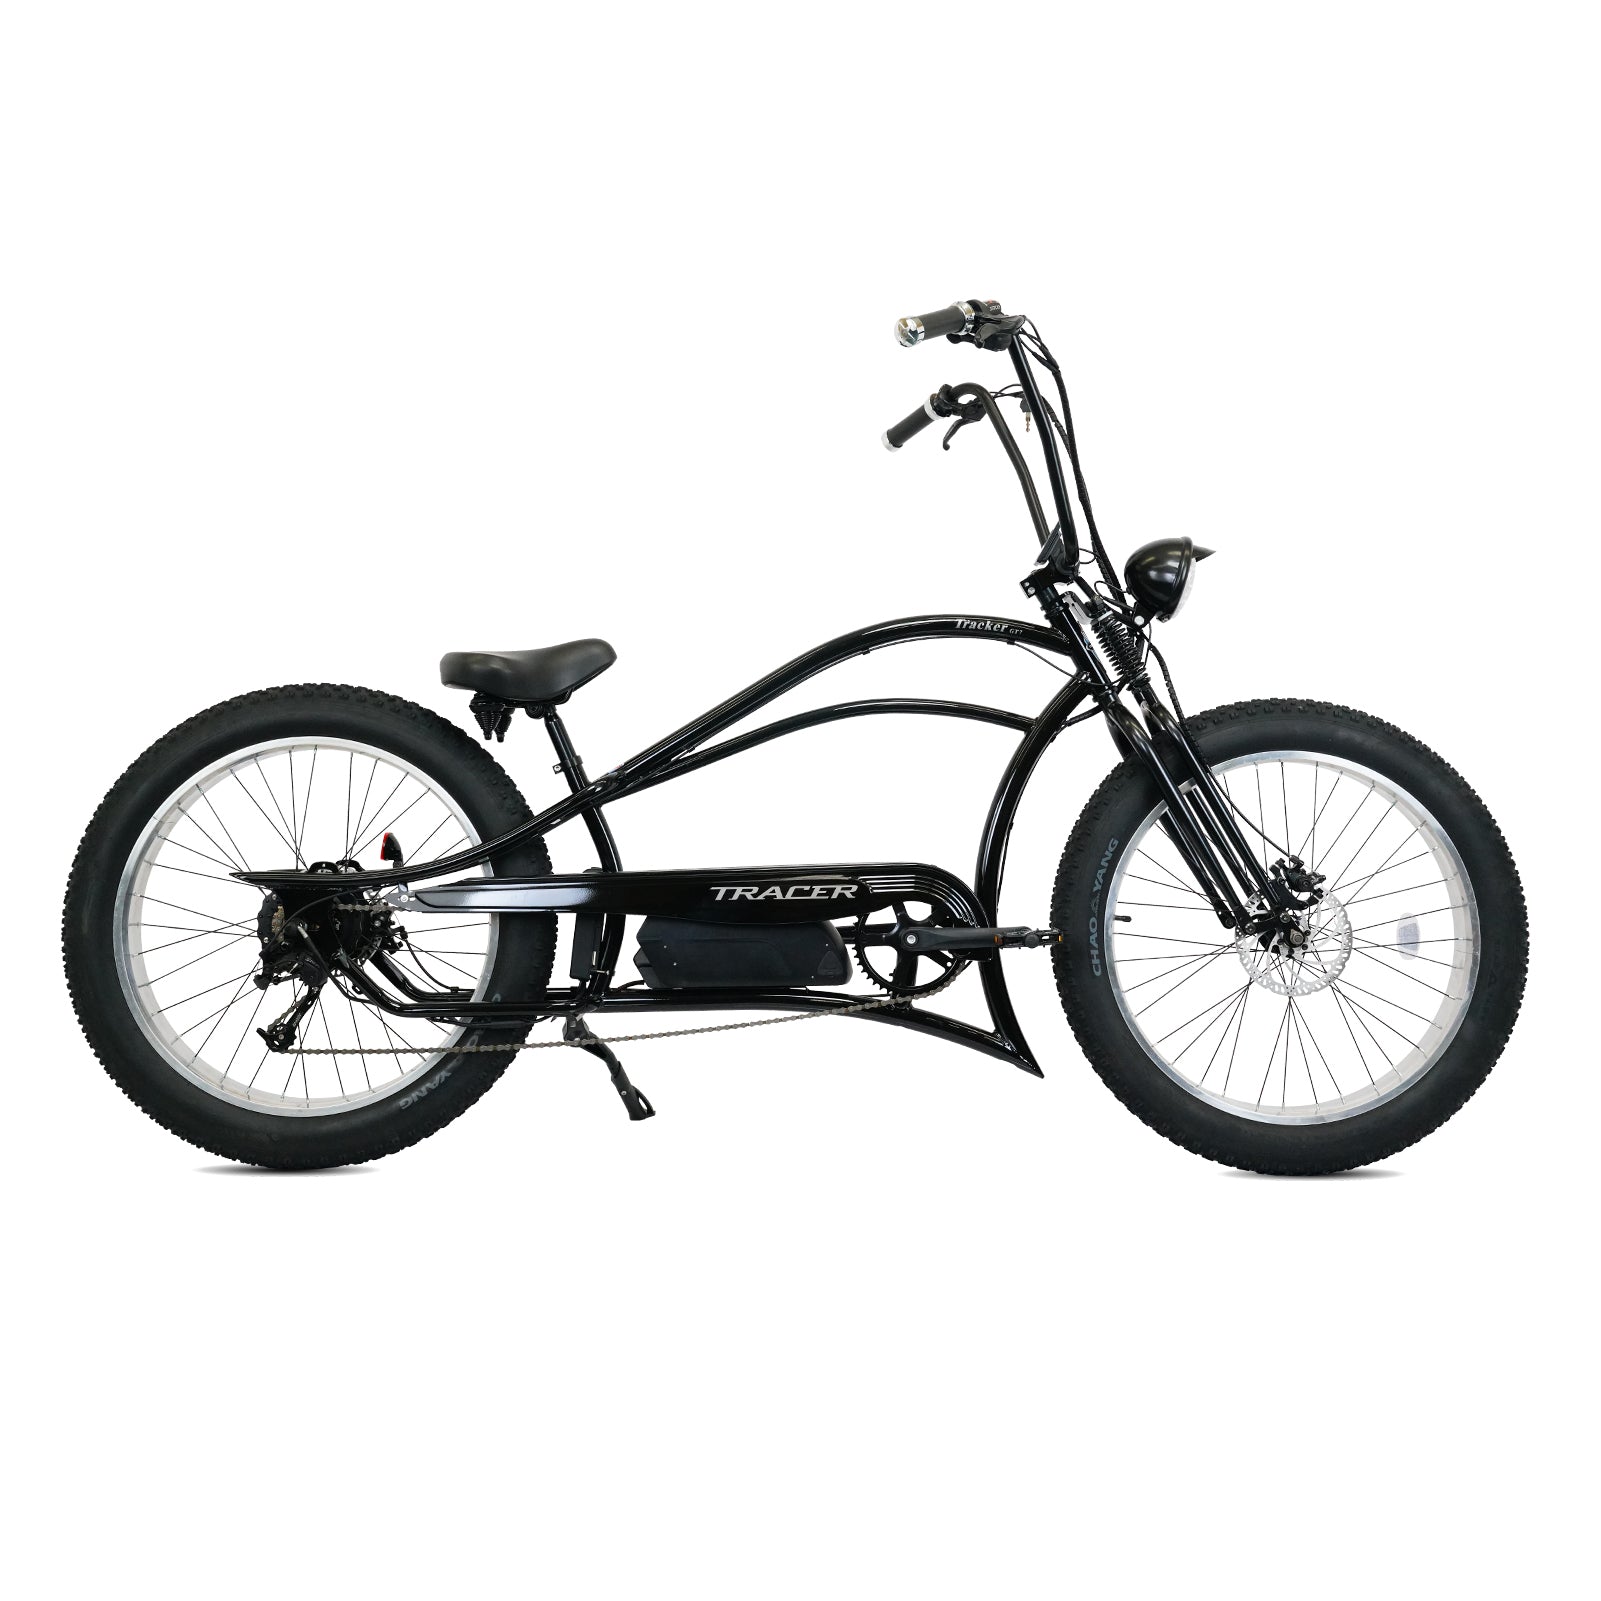 Tracer Tracker DS7  26" 7 Speed Stretch E-Bike with Classic Dual Springer Fork.